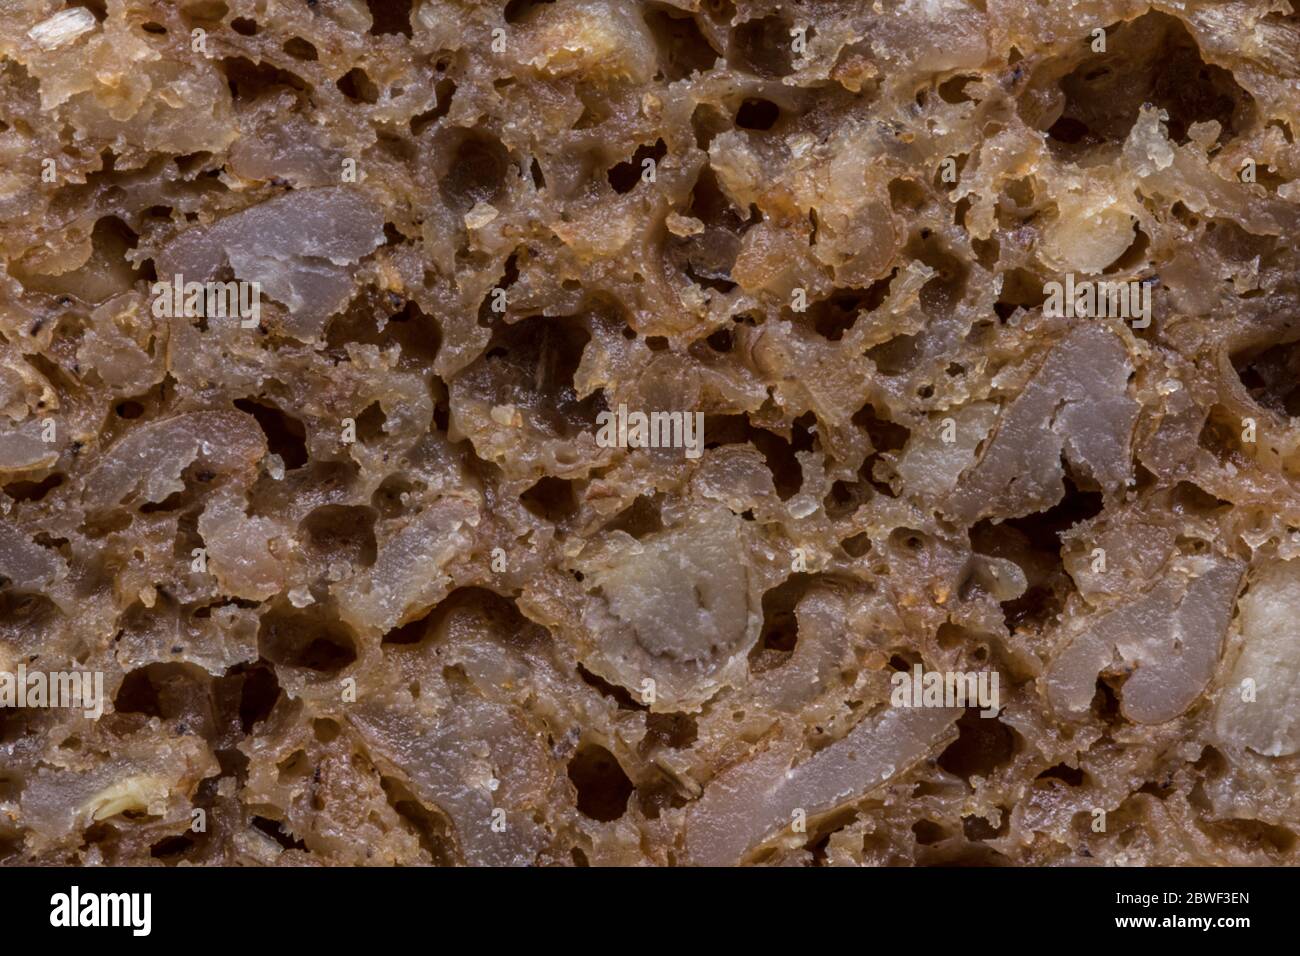 Extreme close-up photo of German dark rye bread, known as Pumpernickel. Royalty free stock photo. Stock Photo